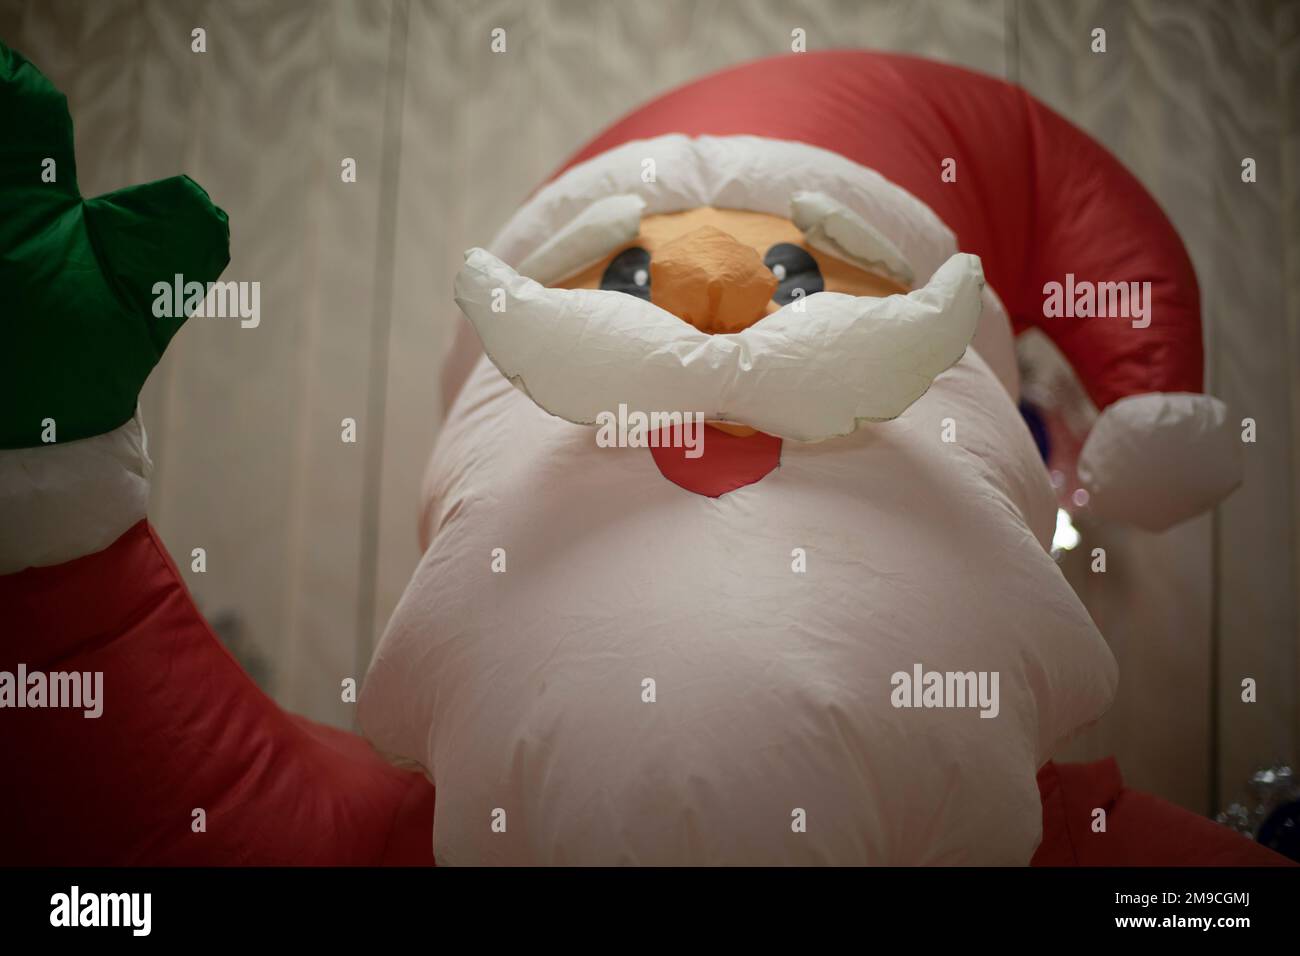 Inflatable Santa Claus. New Year game. Growth doll with air. Stock Photo